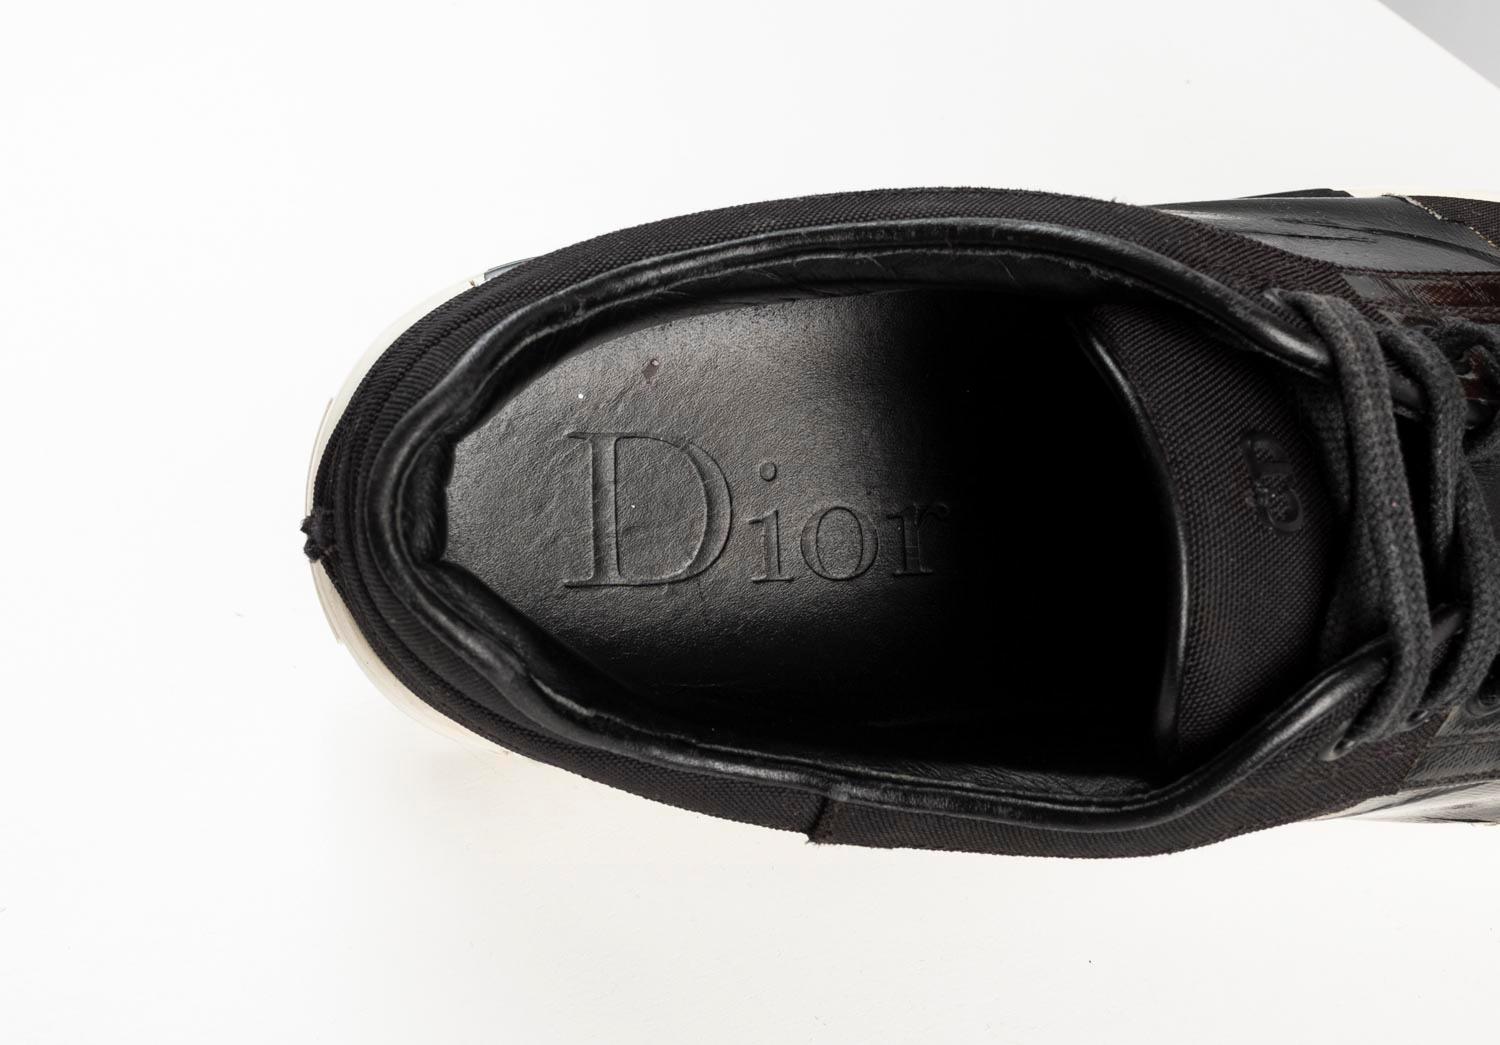 Dior Homme Men Sneakers AW17 Men Shoes Size EUR41, USA 7 ½, UK 6 ½, S694 For Sale 3